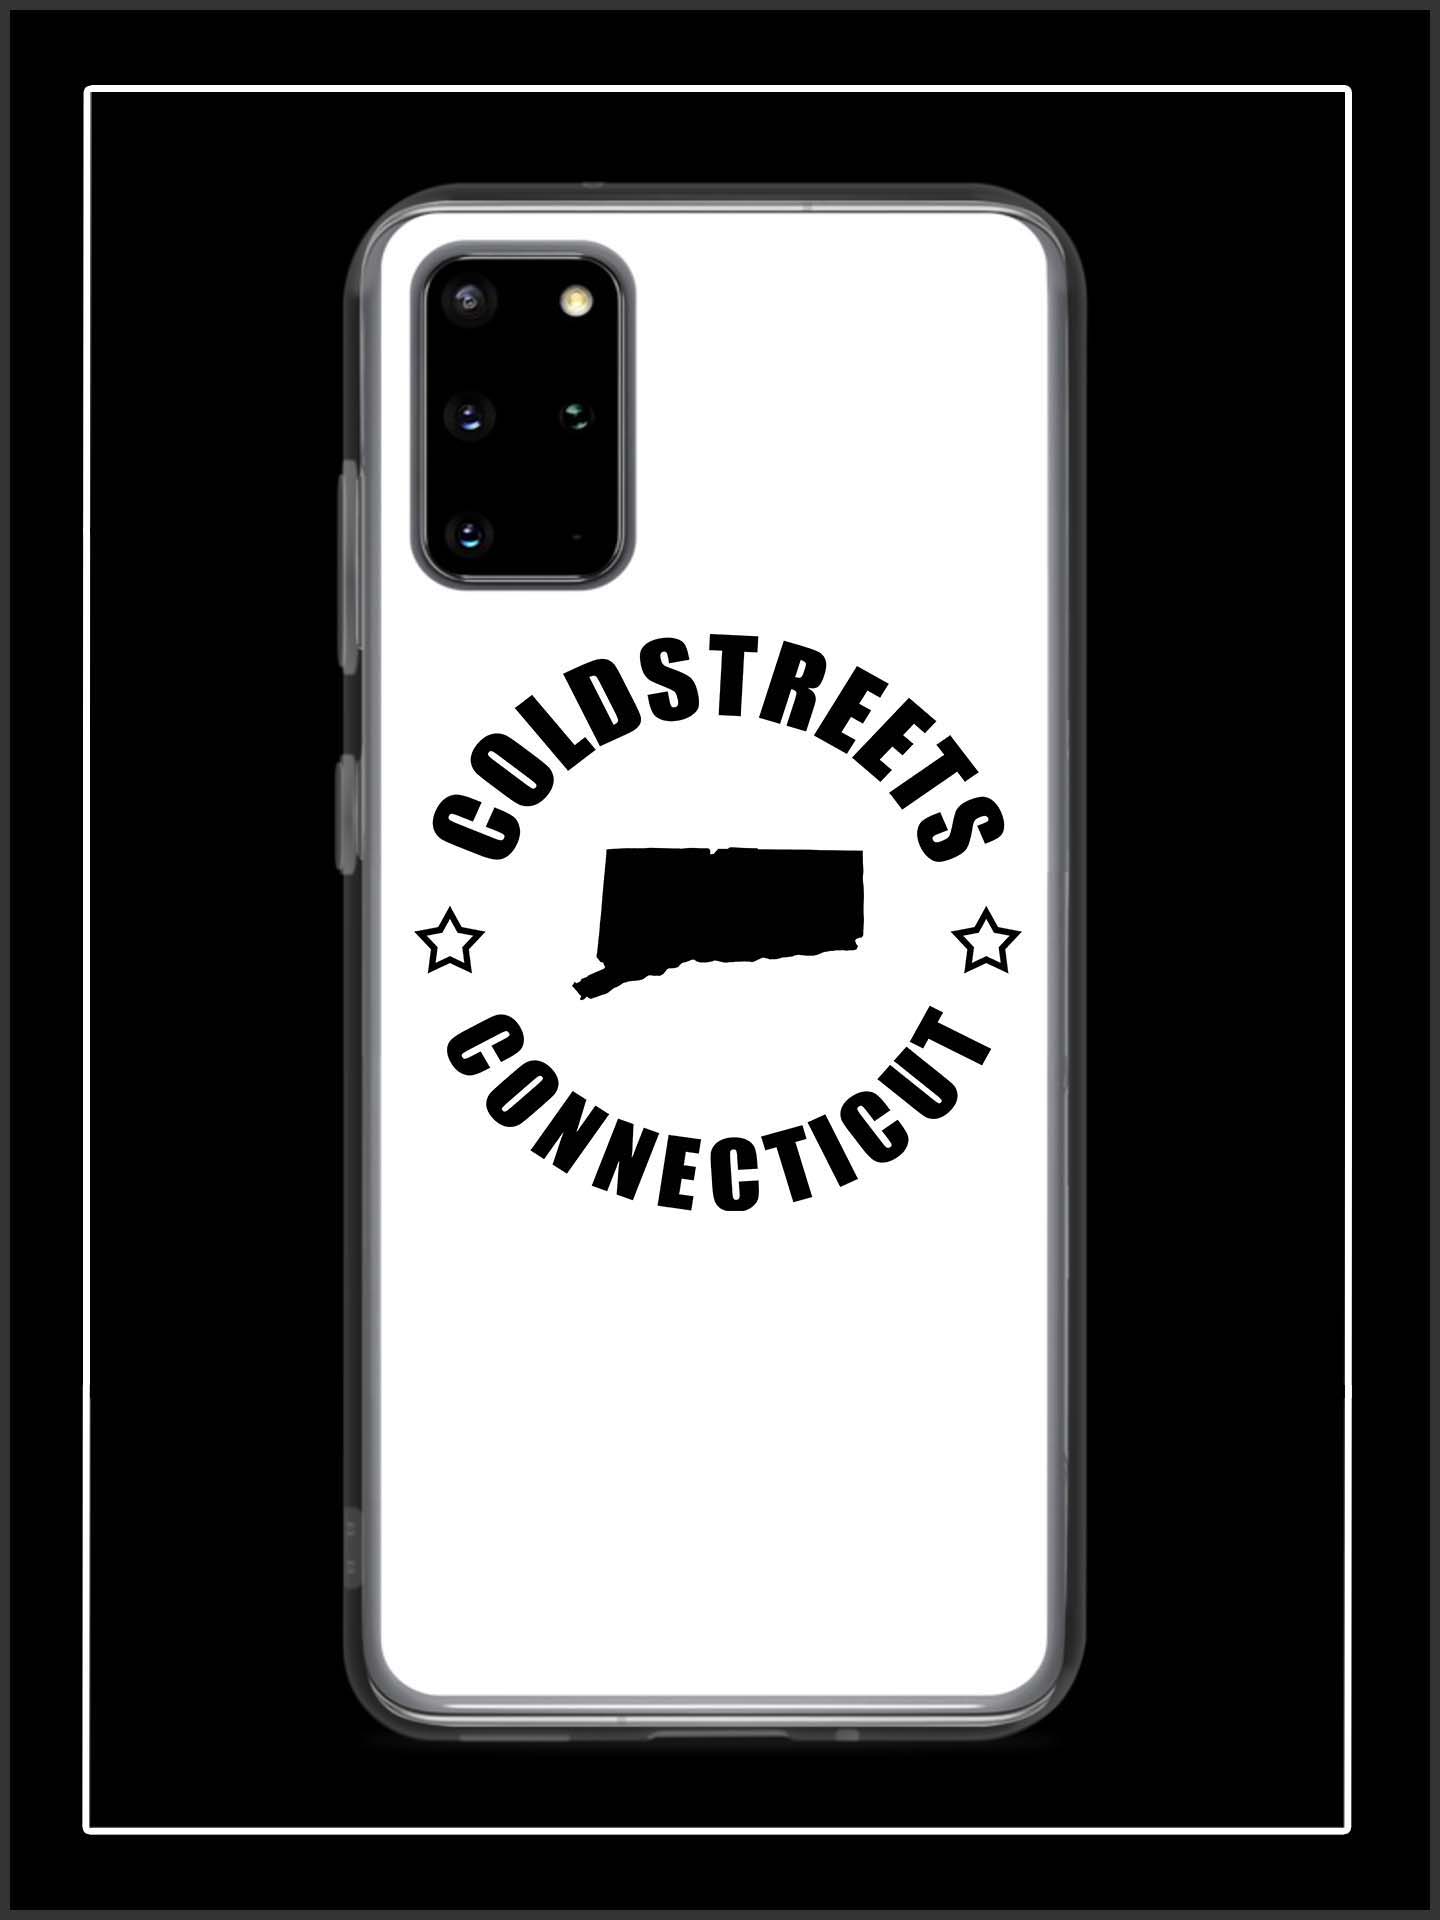 Cold Streets Connecticut Samsung Cases